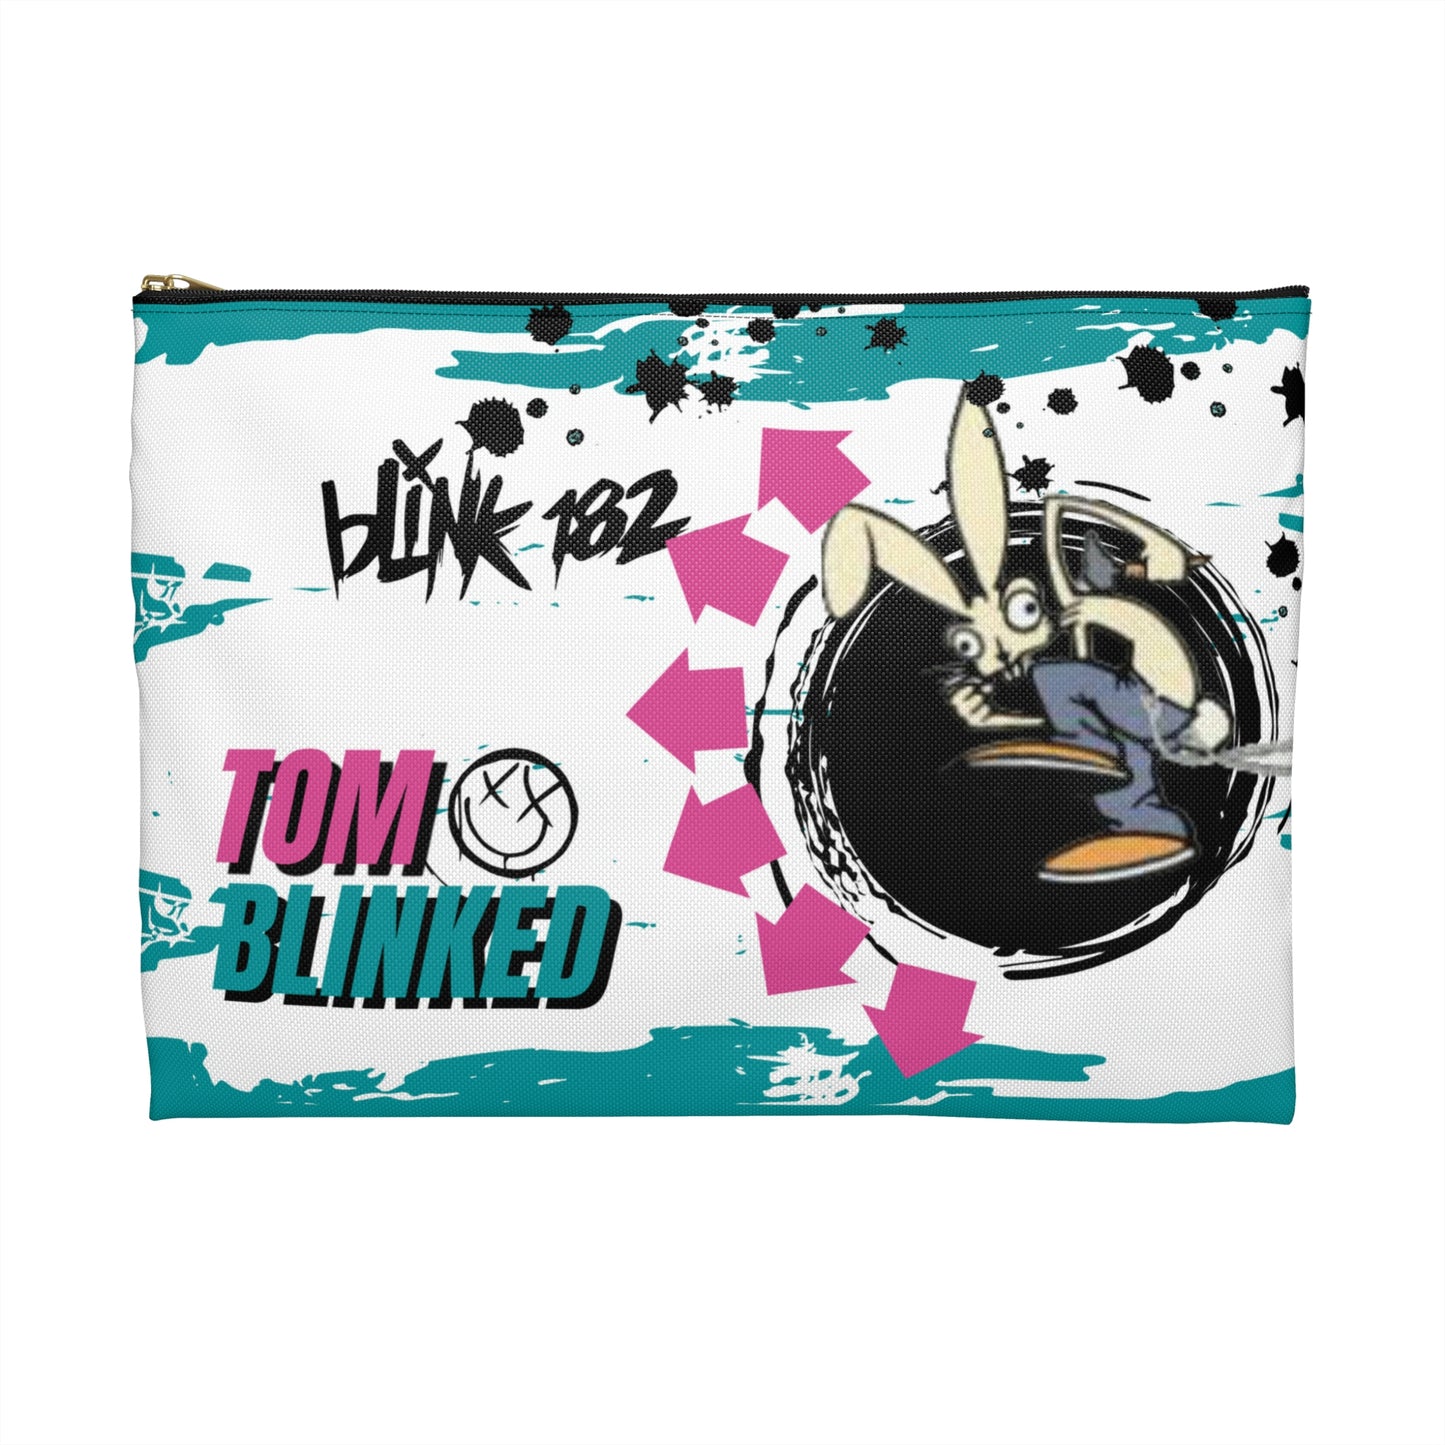 Blink 182 Accessory Pouch, All the Small Things Bag